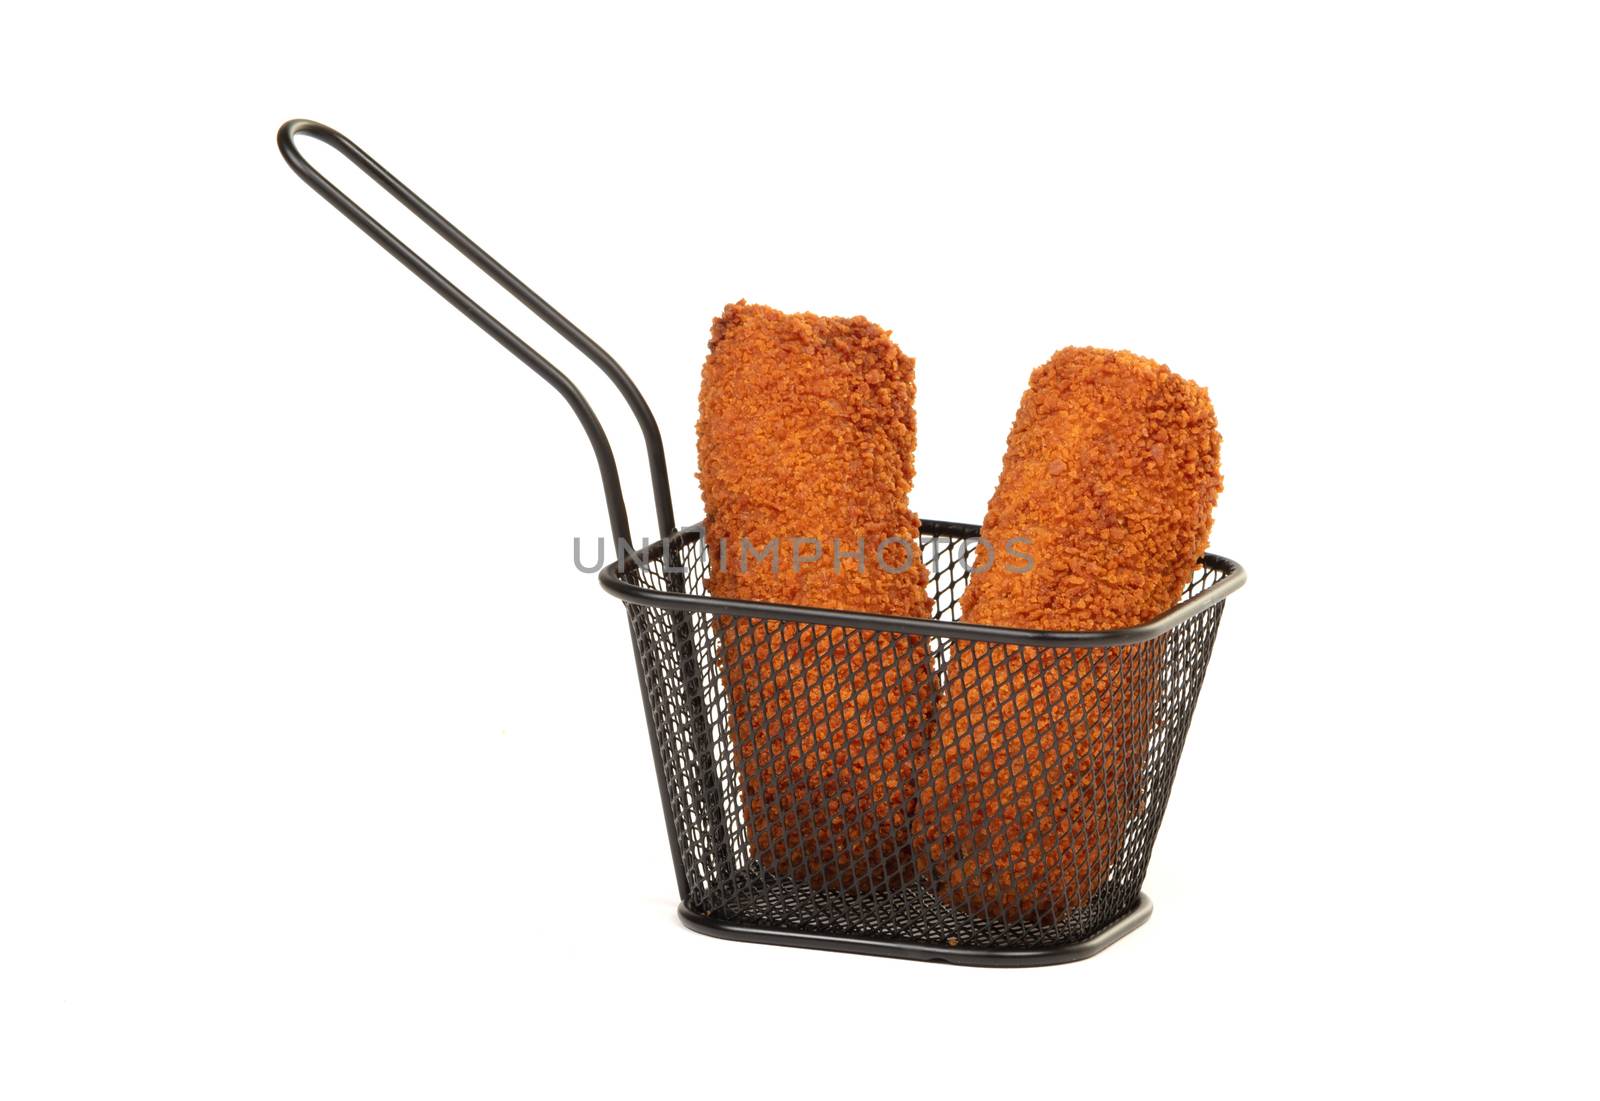 Dutch traditional snack kroket in a small basket by michaklootwijk